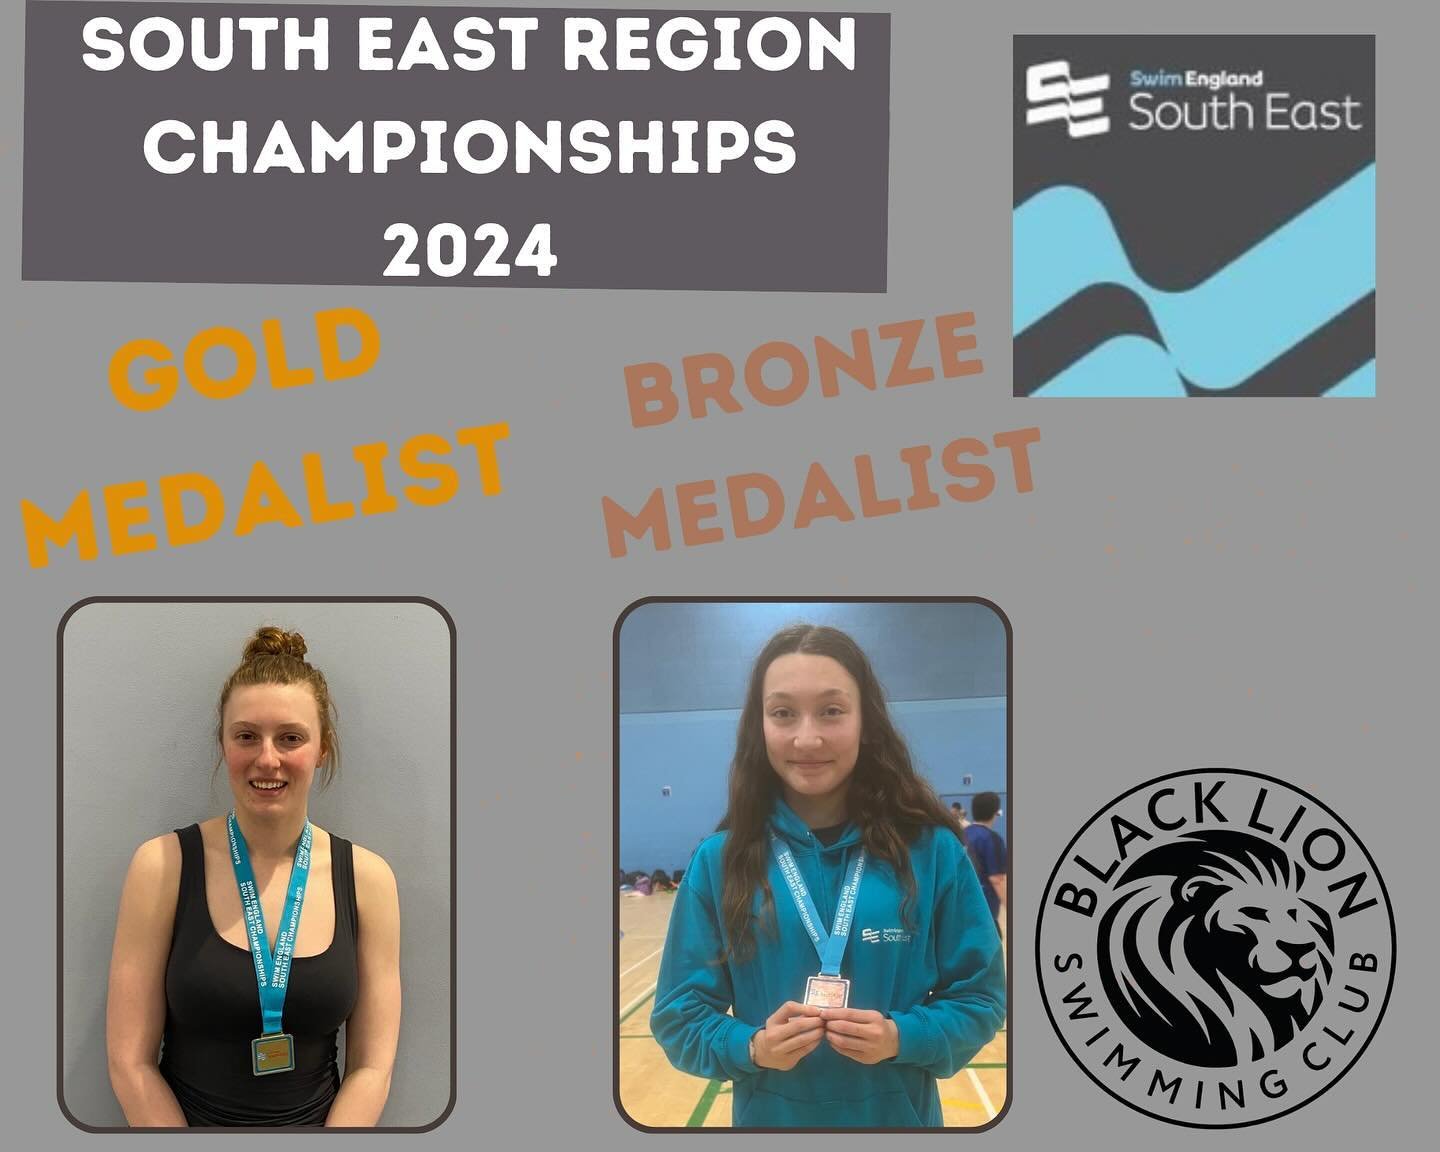 And that&rsquo;s a wrap 🦁🙌🏊🏻&zwj;♀️🏊🏻&zwj;♂️ Mia wins another Gold 🥇 for the 400IM 
Calyssa swam the mighty 1500m and claimed the bronze 🥉 
Massive well done to you both 👏🦁🏊🏻&zwj;♀️🏊🏻&zwj;♂️
#competitiveswimming #RuleThePool #fastswimmi